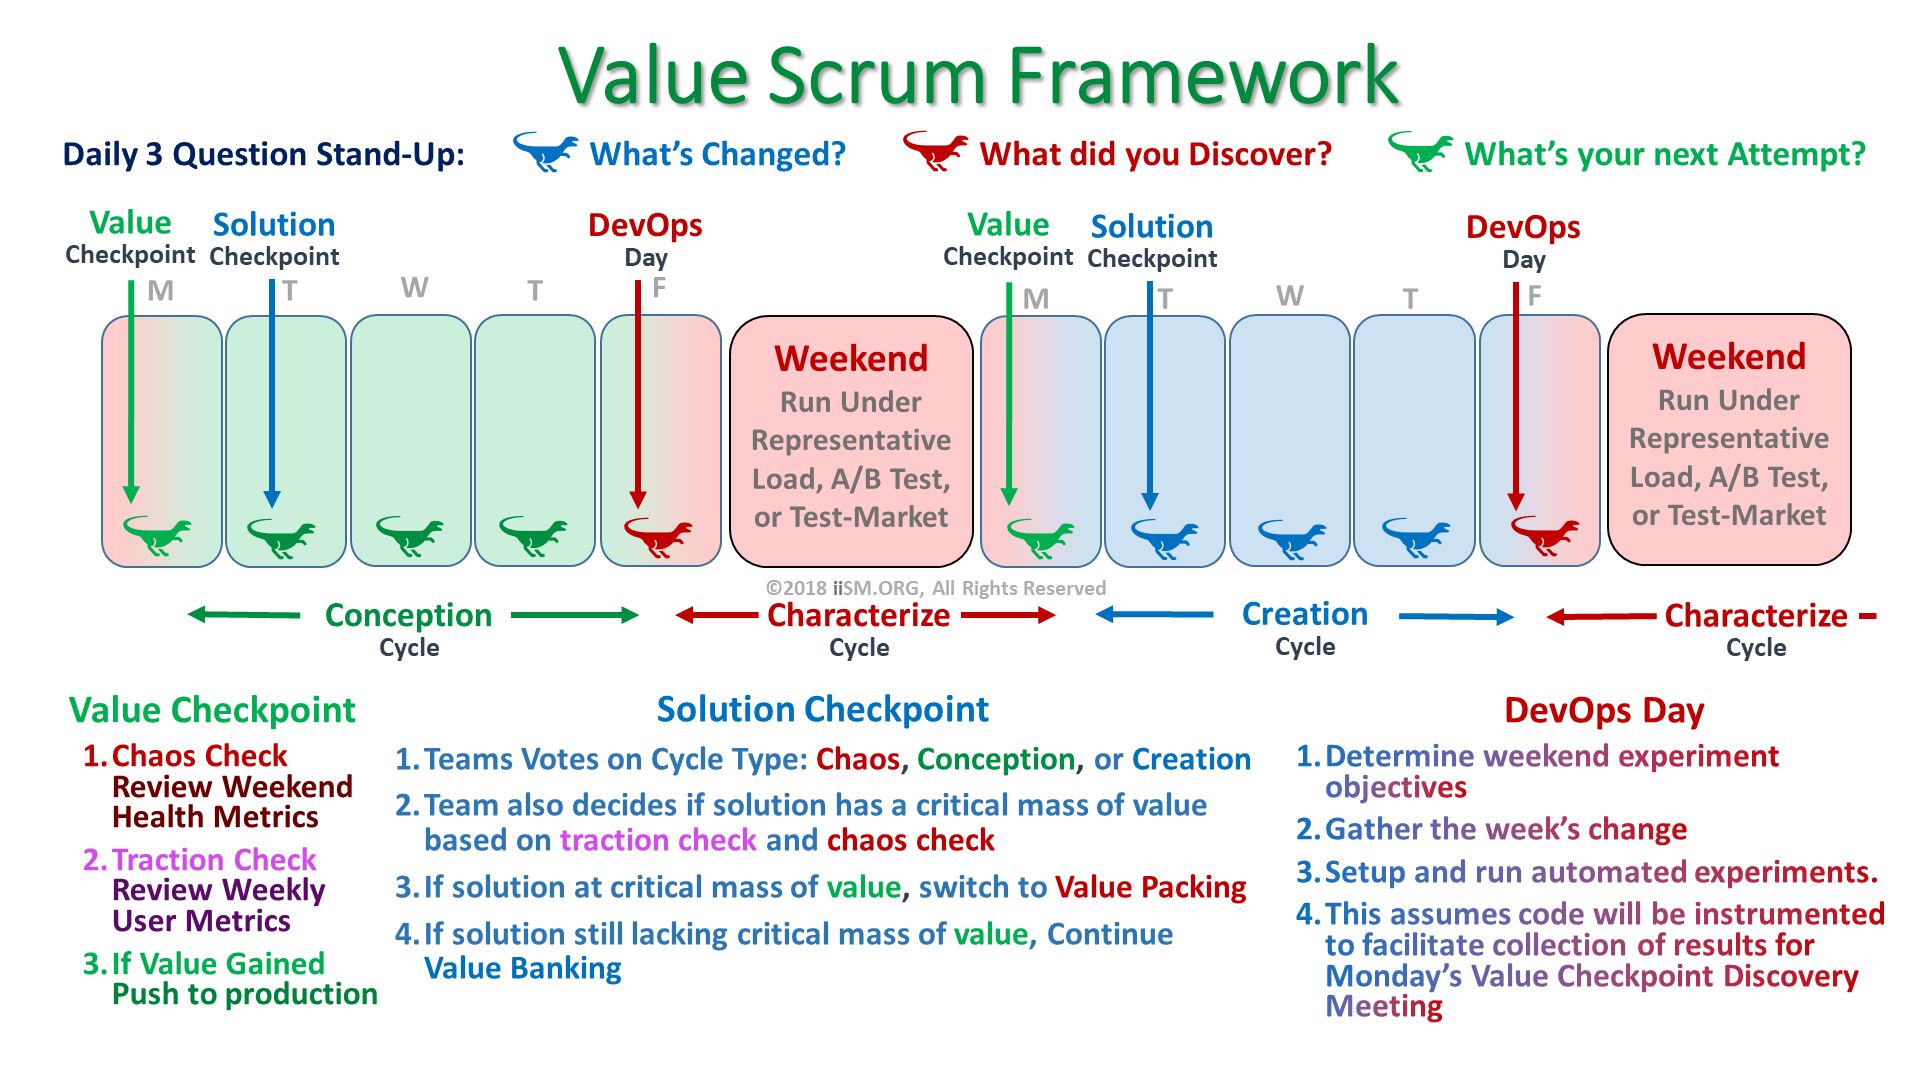 Value Scrum Framework. ©2018 iiSM.ORG, All Rights Reserved. Value Checkpoint
Chaos Check Review Weekend Health Metrics
Traction CheckReview Weekly User Metrics
If Value Gained Push to production. Solution Checkpoint
Teams Votes on Cycle Type: Chaos, Conception, or Creation
Team also decides if solution has a critical mass of value based on traction check and chaos check 
If solution at critical mass of value, switch to Value Packing
If solution still lacking critical mass of value, Continue Value Banking. Daily 3 Question Stand-Up:               What’s Changed?                What did you Discover?                What’s your next Attempt?   . DevOps Day
Determine weekend experiment objectives
Gather the week’s change
Setup and run automated experiments.
This assumes code will be instrumented to facilitate collection of results for Monday’s Value Checkpoint Discovery Meeting. 